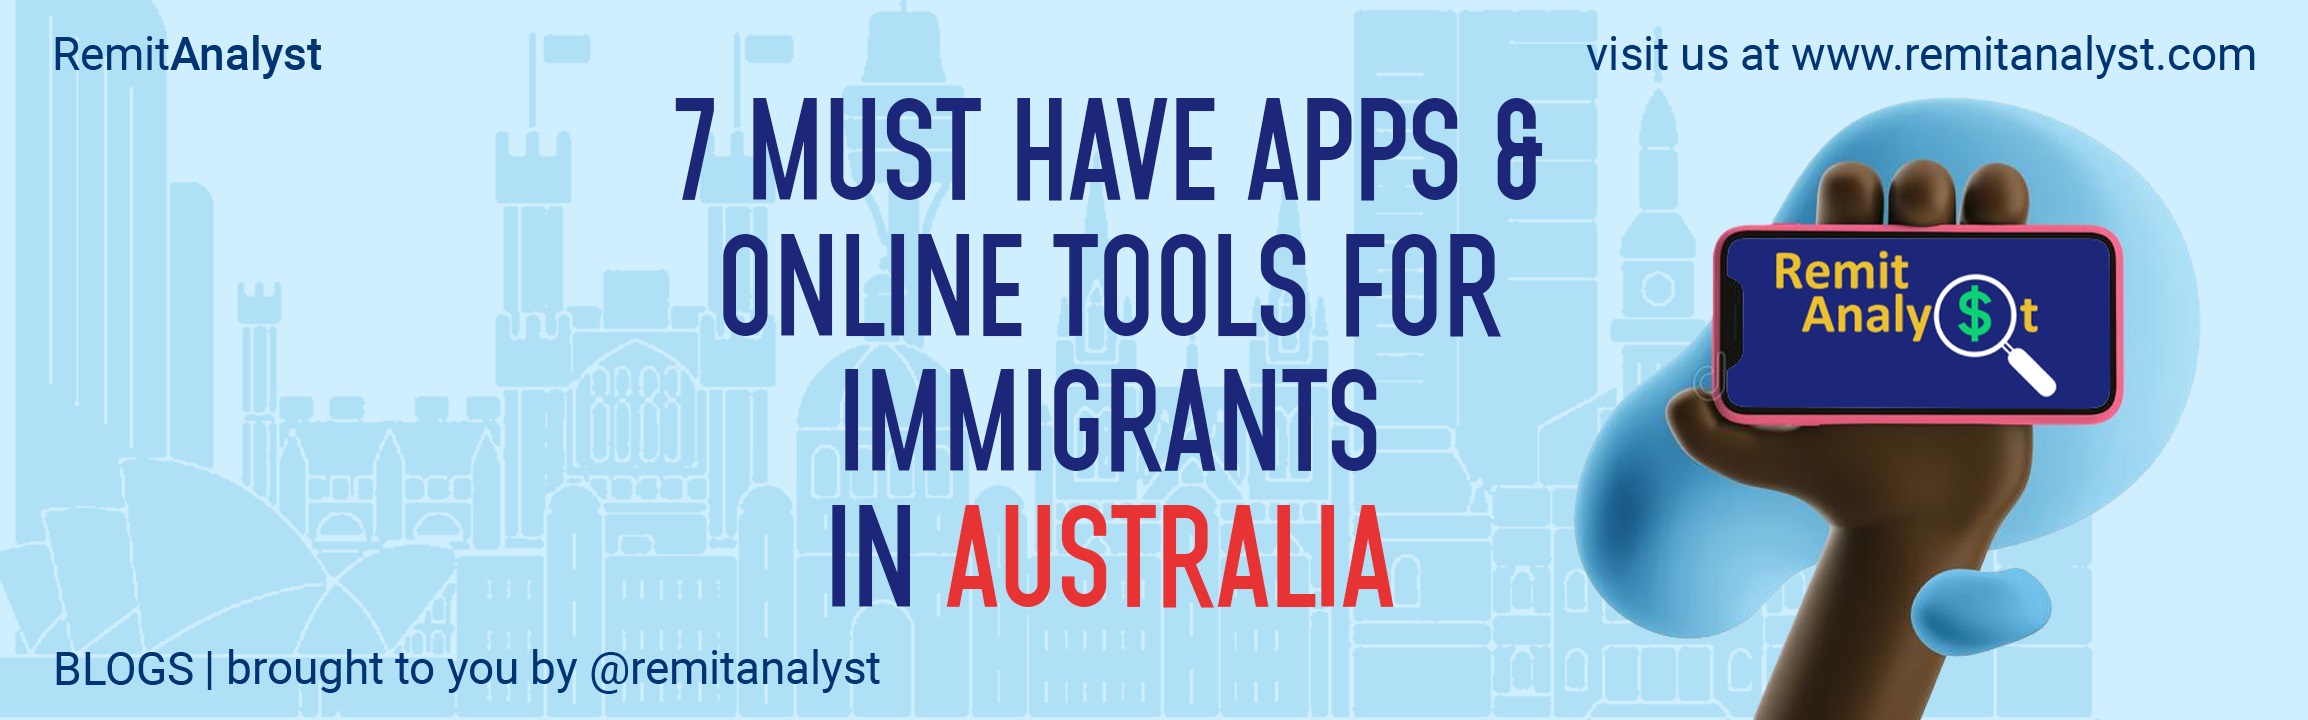 7-must-have-apps-and-online-tools-for-immigrants-in-australia-title